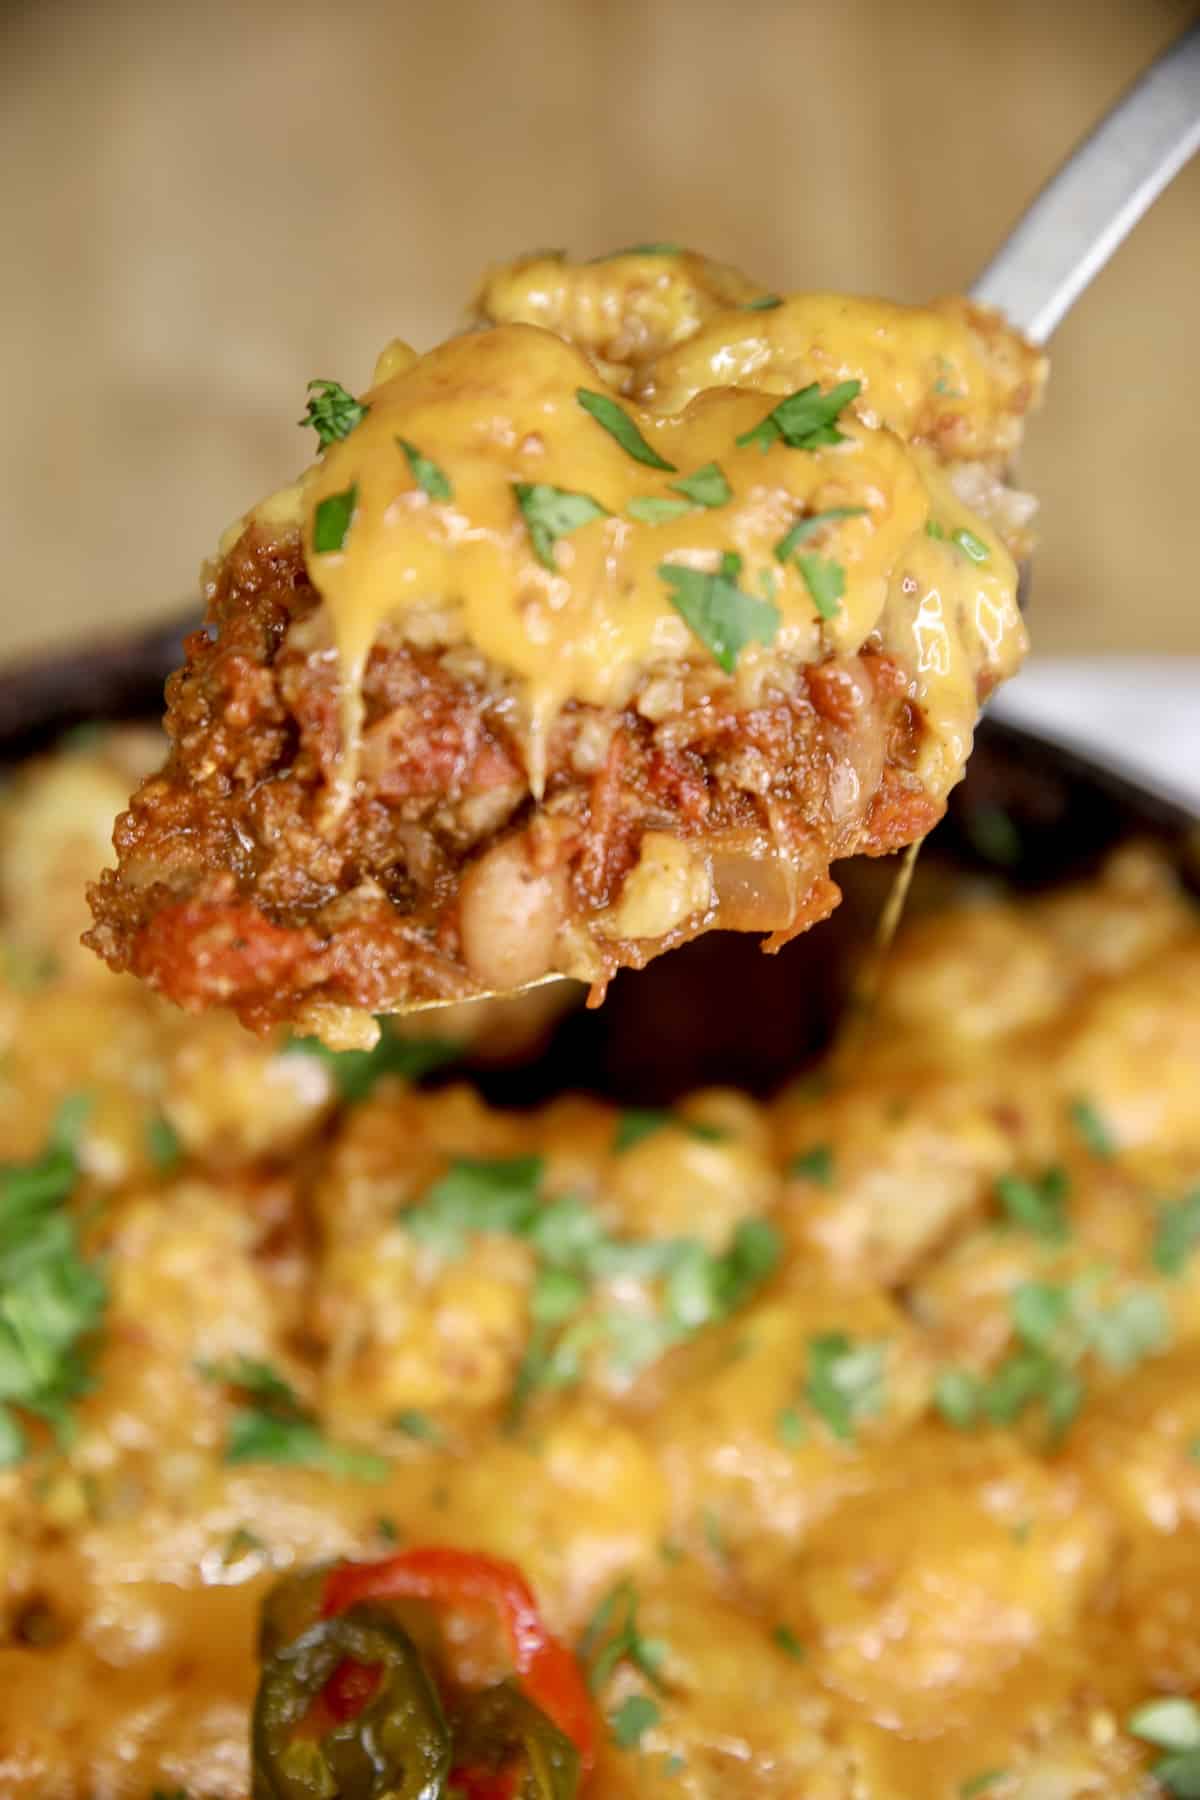 Serving chili cheese tater tot casserole on a spoon.